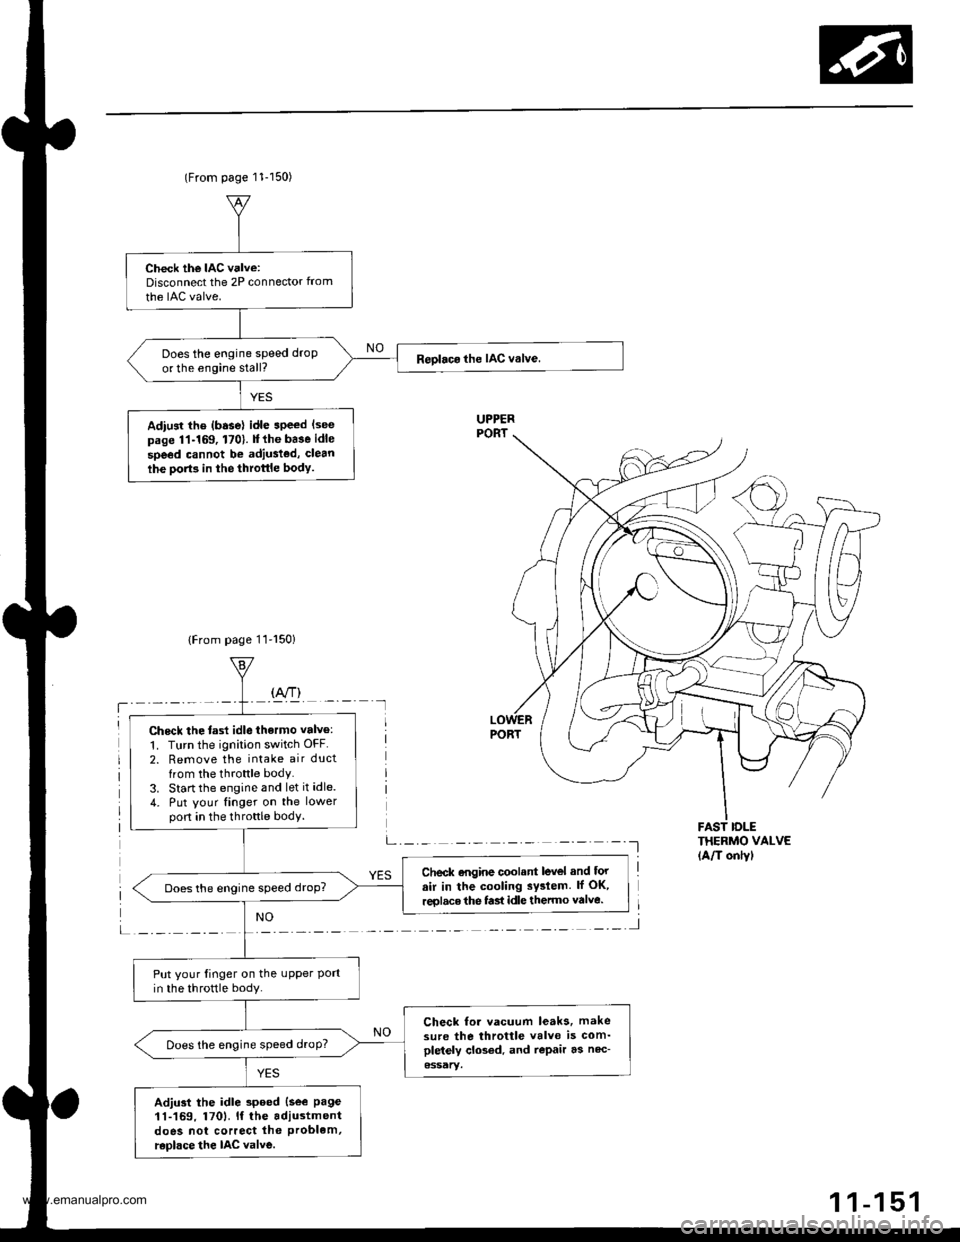 HONDA CR-V 1999 RD1-RD3 / 1.G Workshop Manual 
(From page 11-150)
{From page 11-150}
THERMO VALVE(A/T onlyl
Check the IAC valve:Disconnect the 2P connector from
the IAC valve.
Does the engine speed droP
or the engine stall?
Adiust the (basel idl�